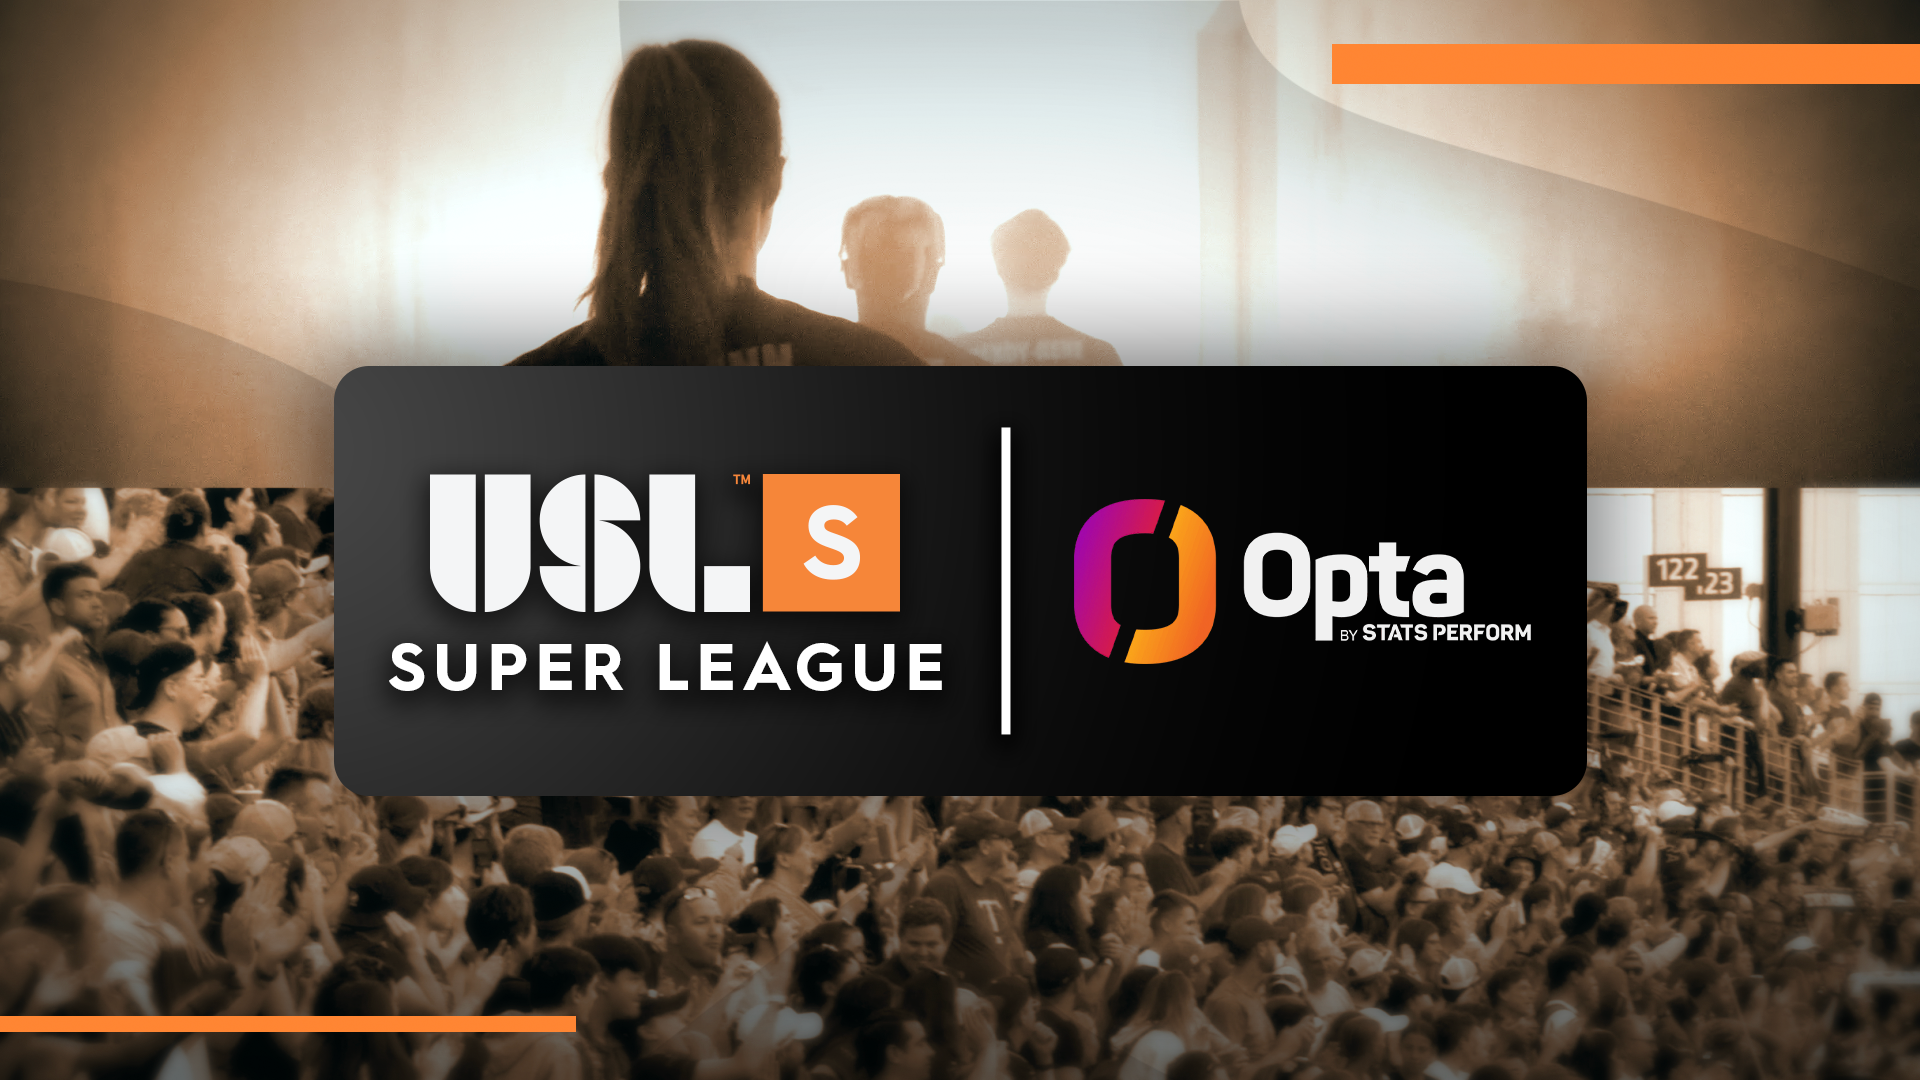 Global Leader Stats Perform’s Opta to Provide World-Class Data Experience for USL Super League featured image